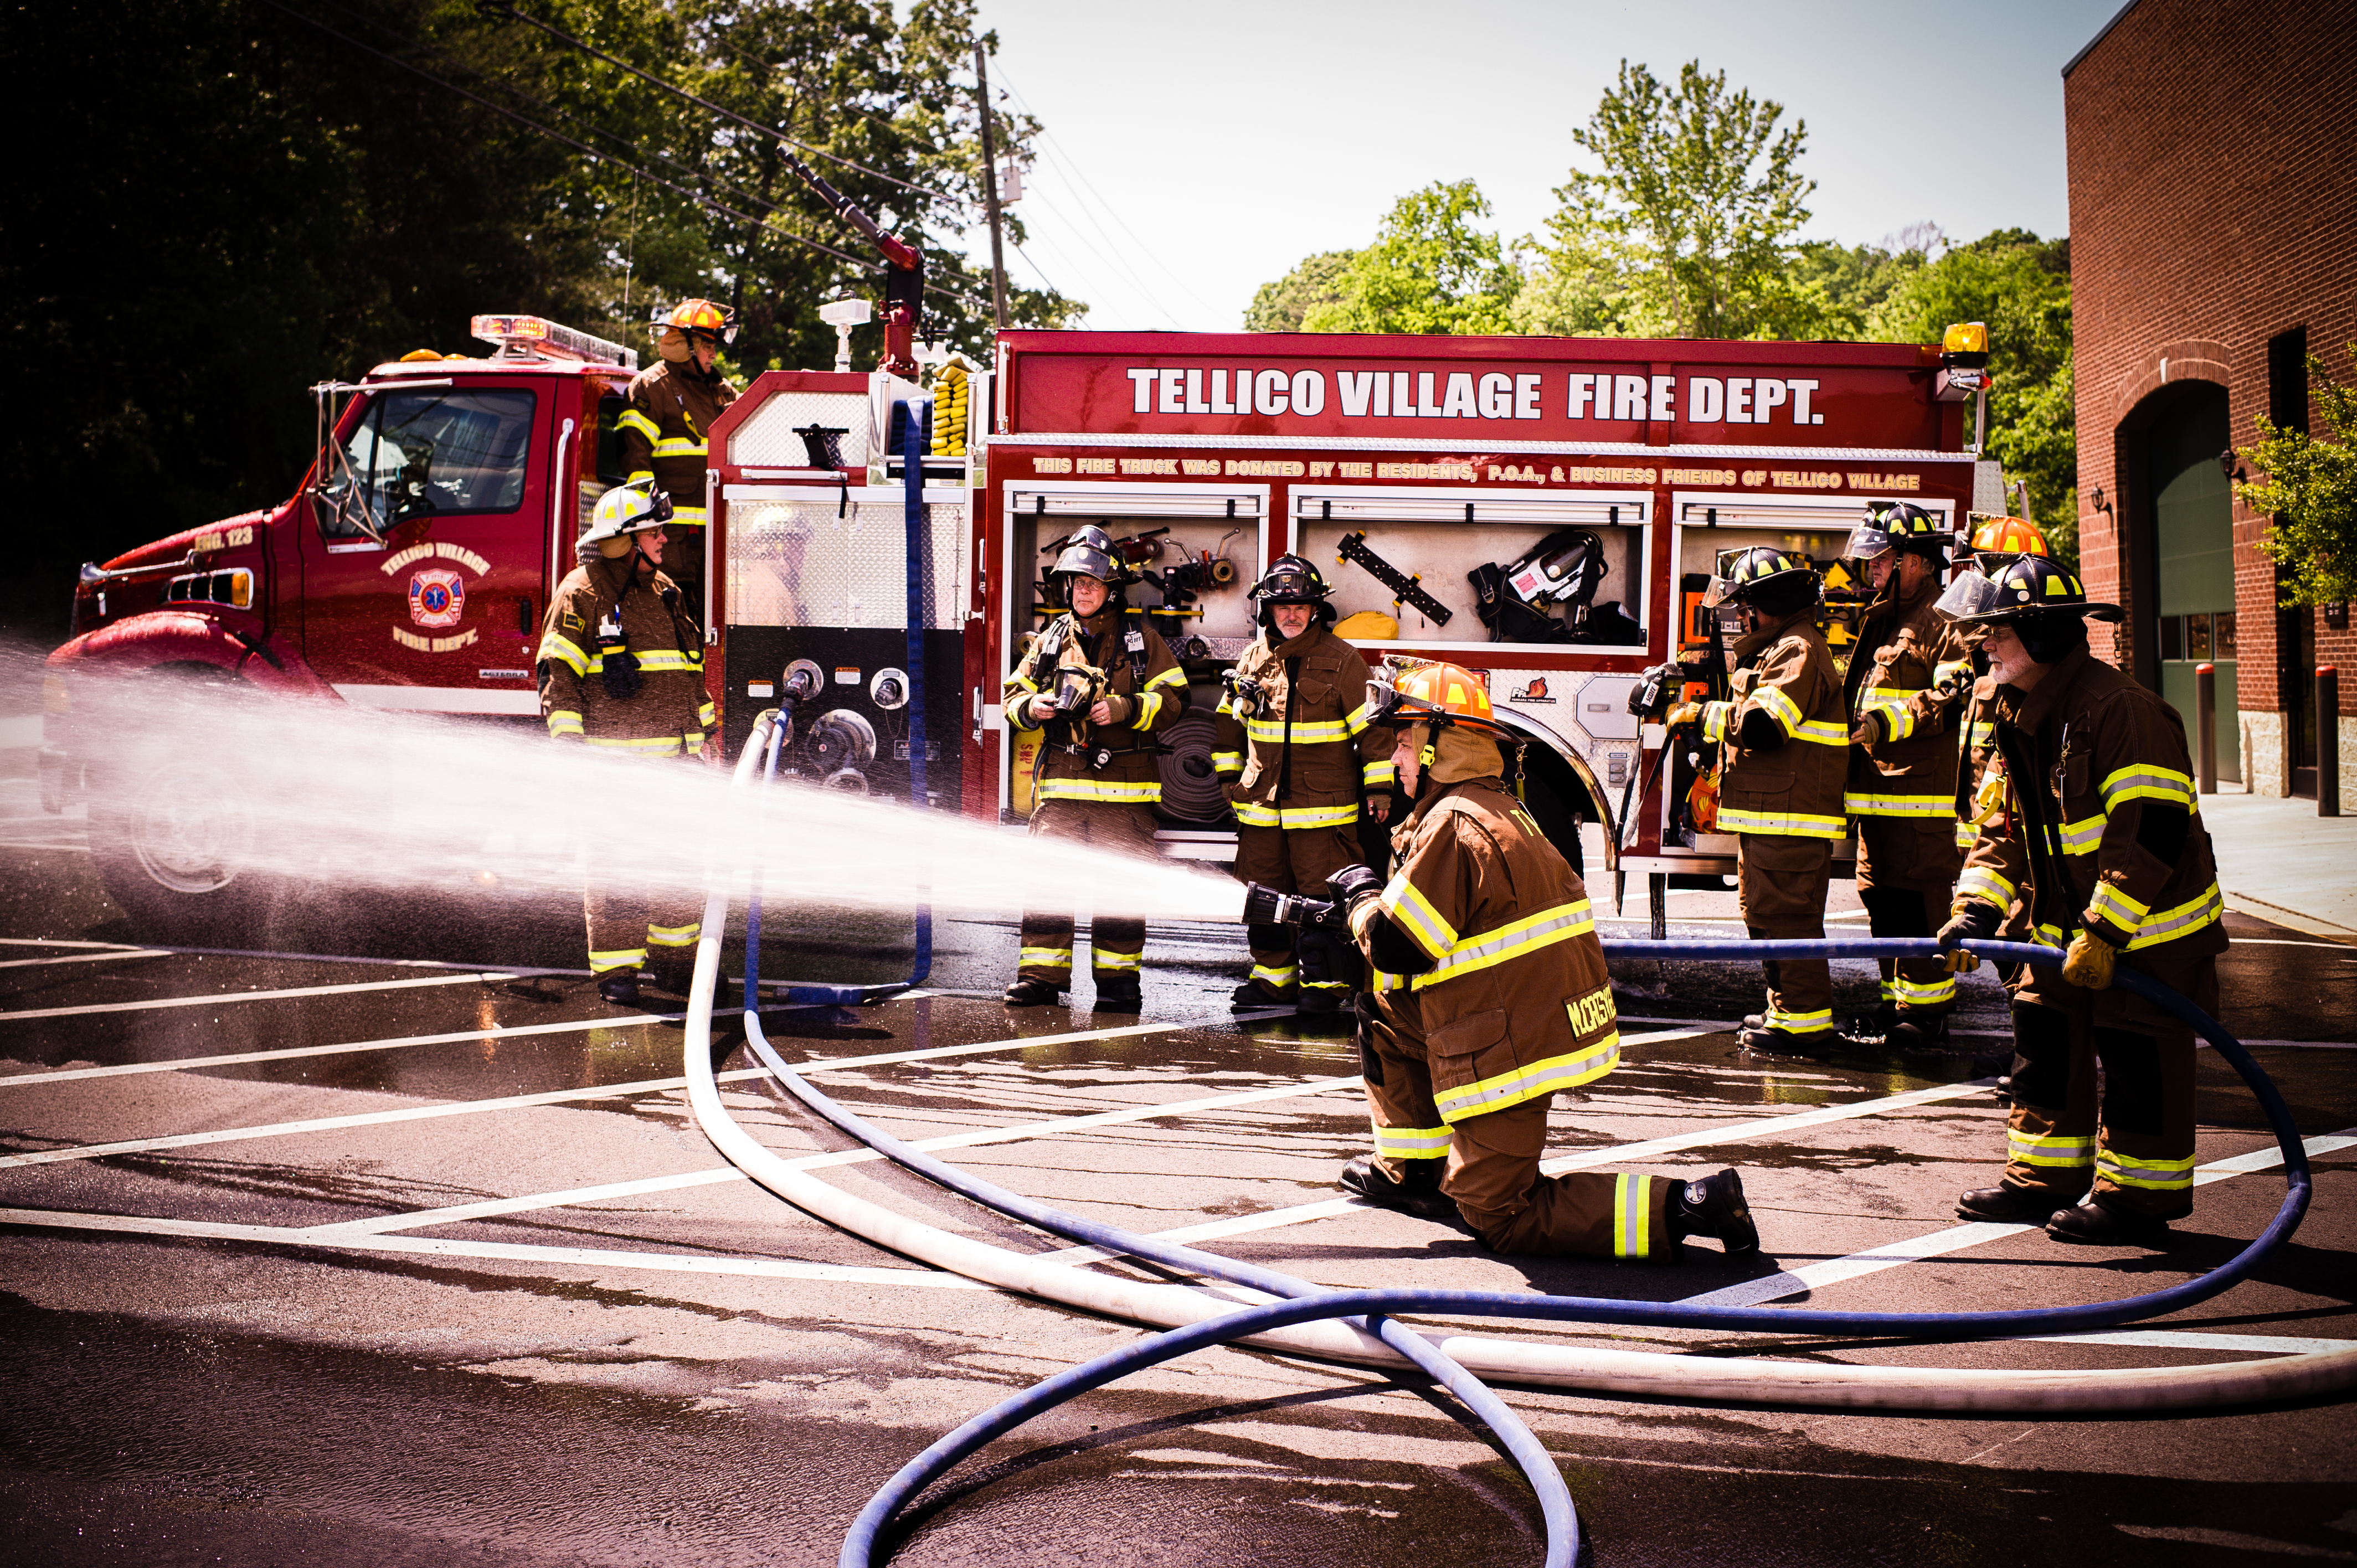 22. The Tellico Village Volunteer Fire Department is among Tennessee’s best